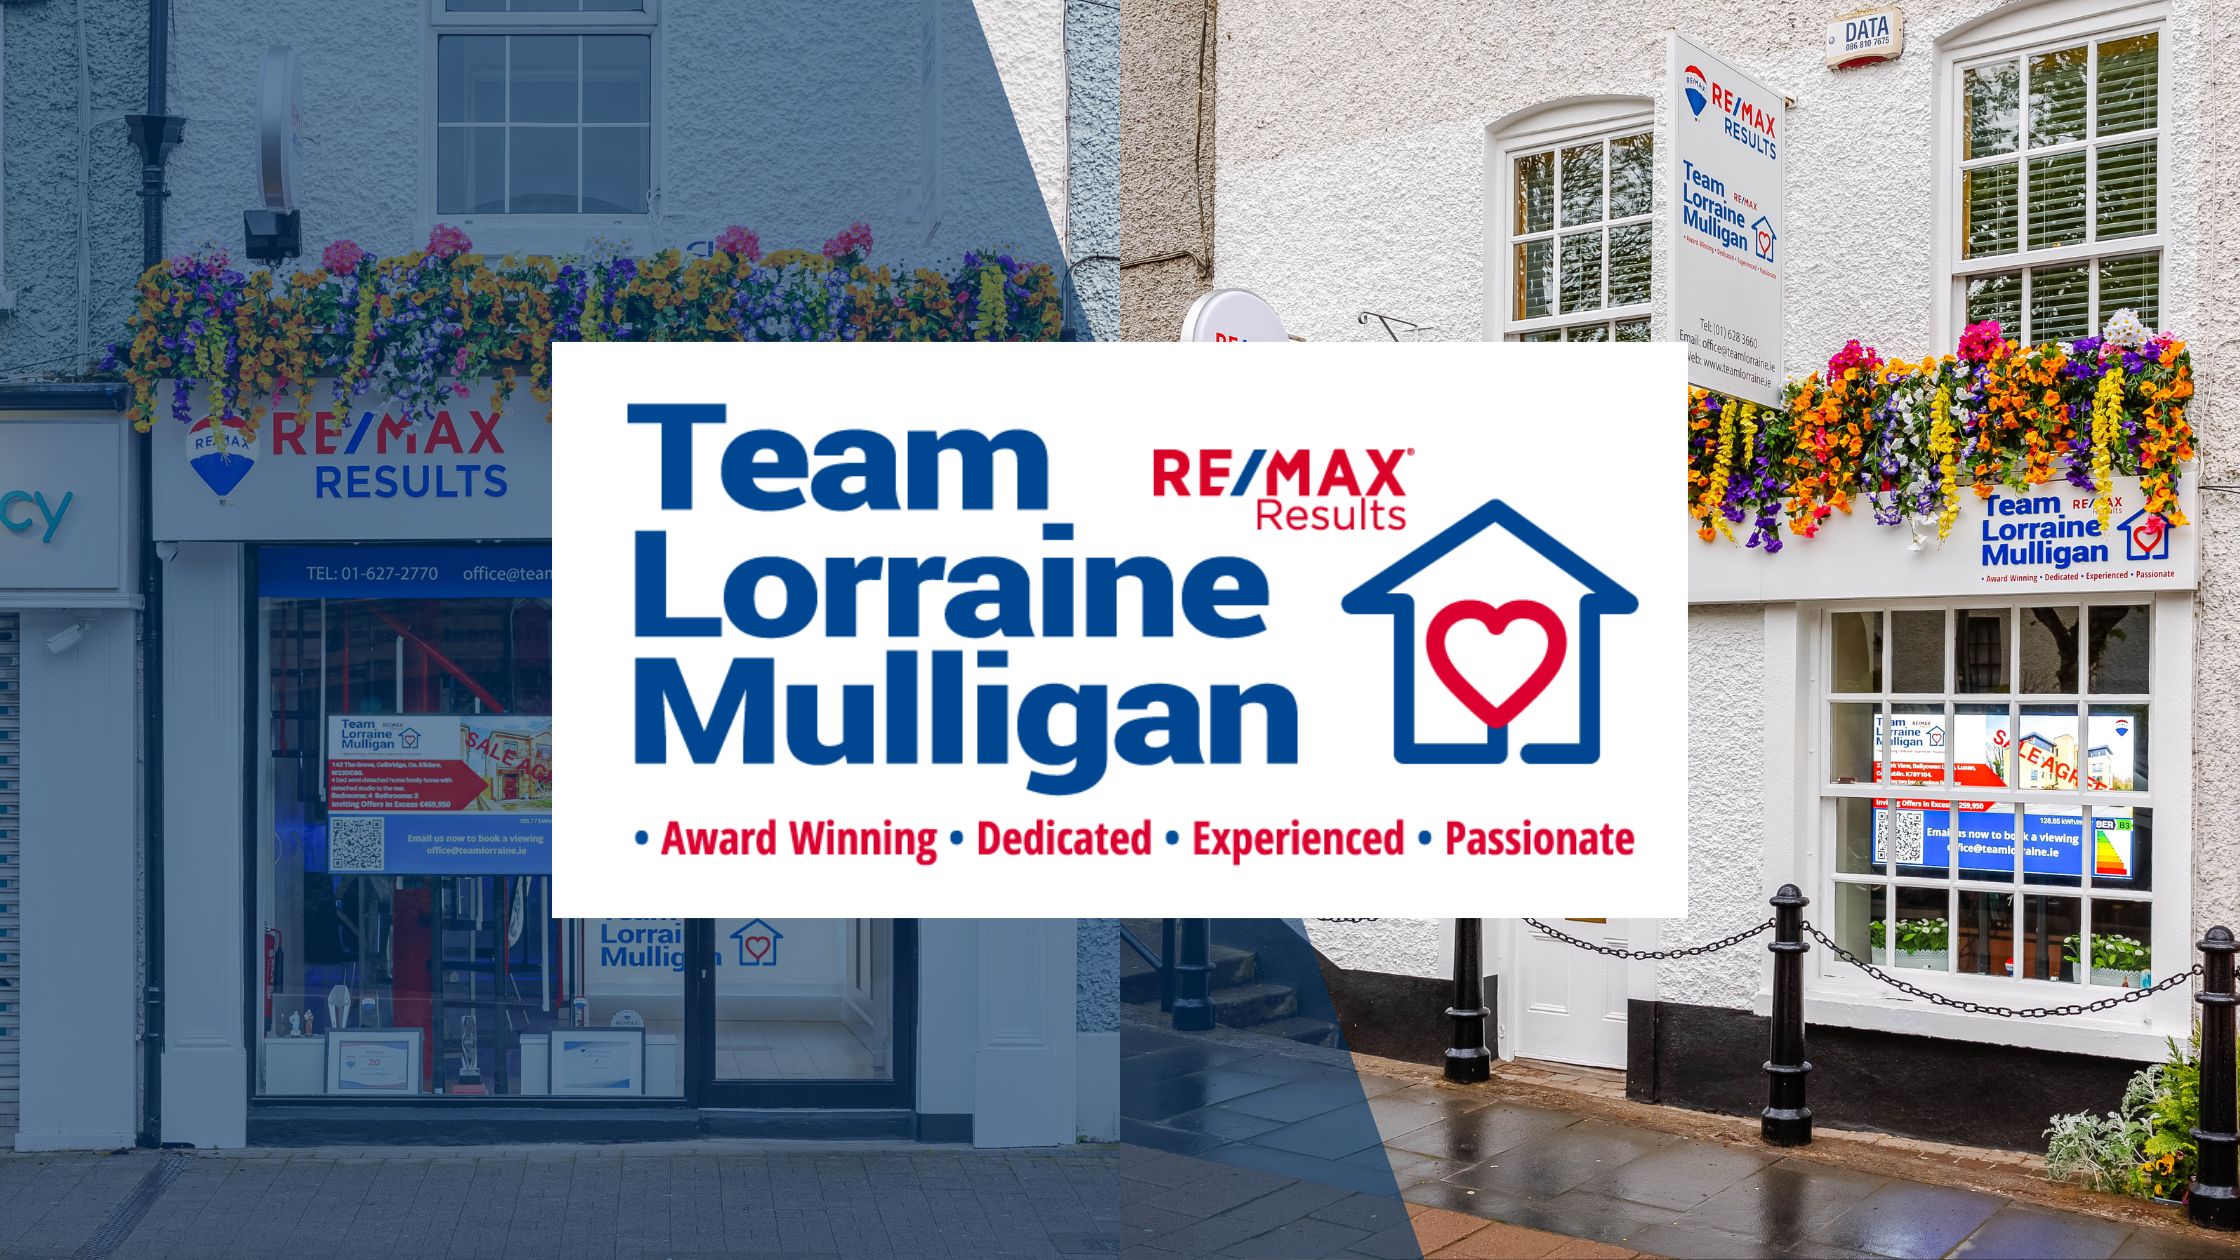 More Than Just a Free Valuation: Why Choose Team Lorraine Mulligan